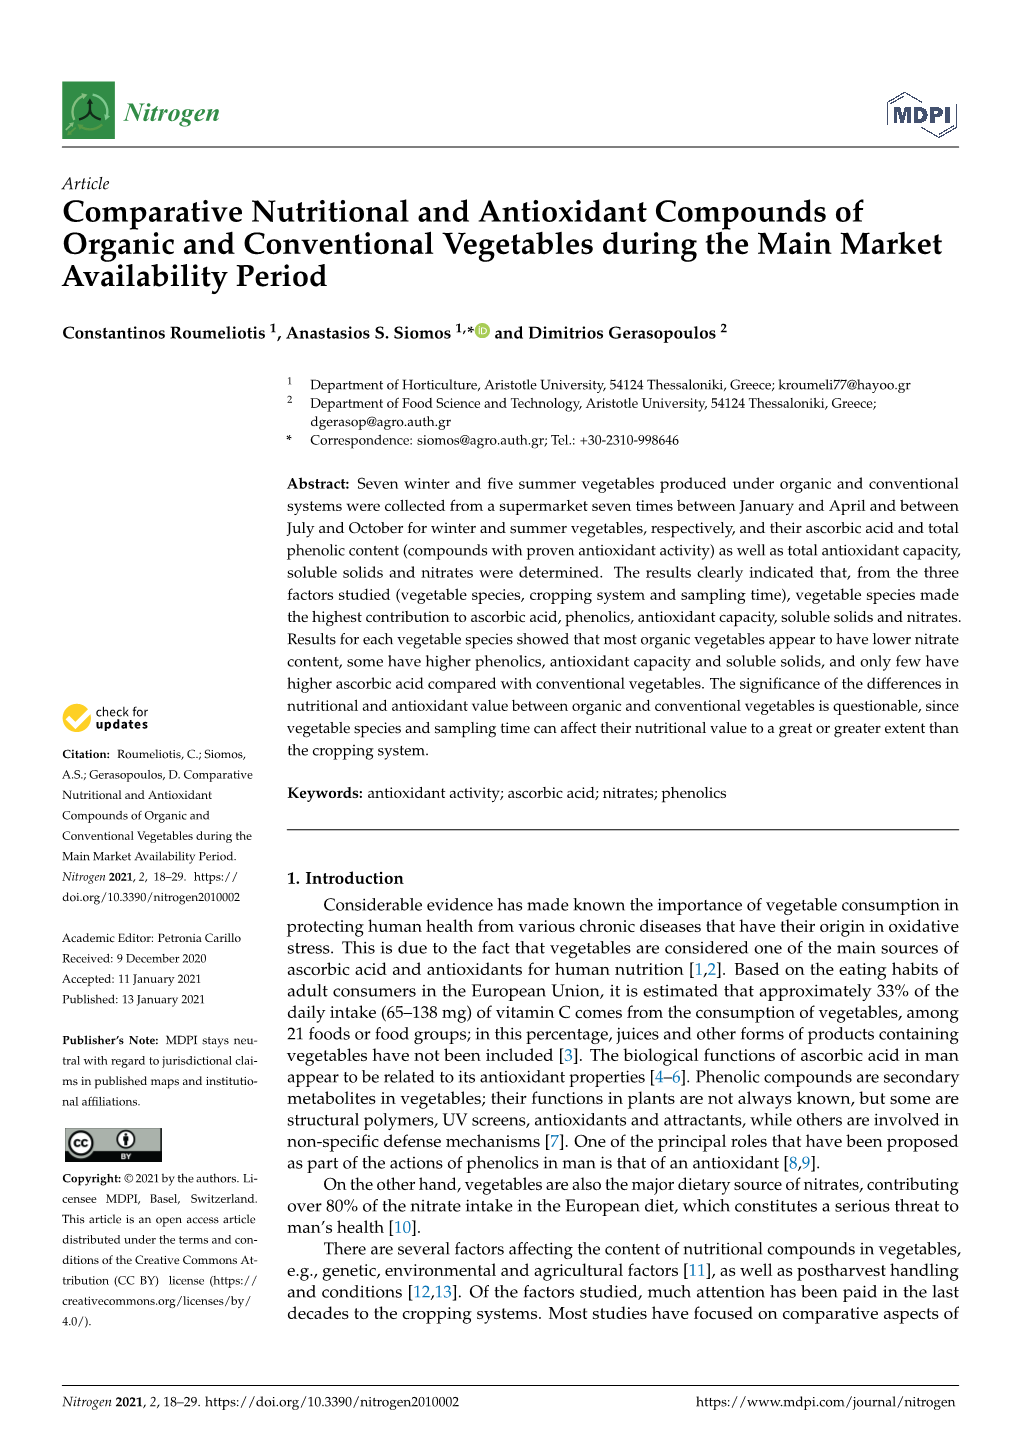 Comparative Nutritional and Antioxidant Compounds of Organic and Conventional Vegetables During the Main Market Availability Period